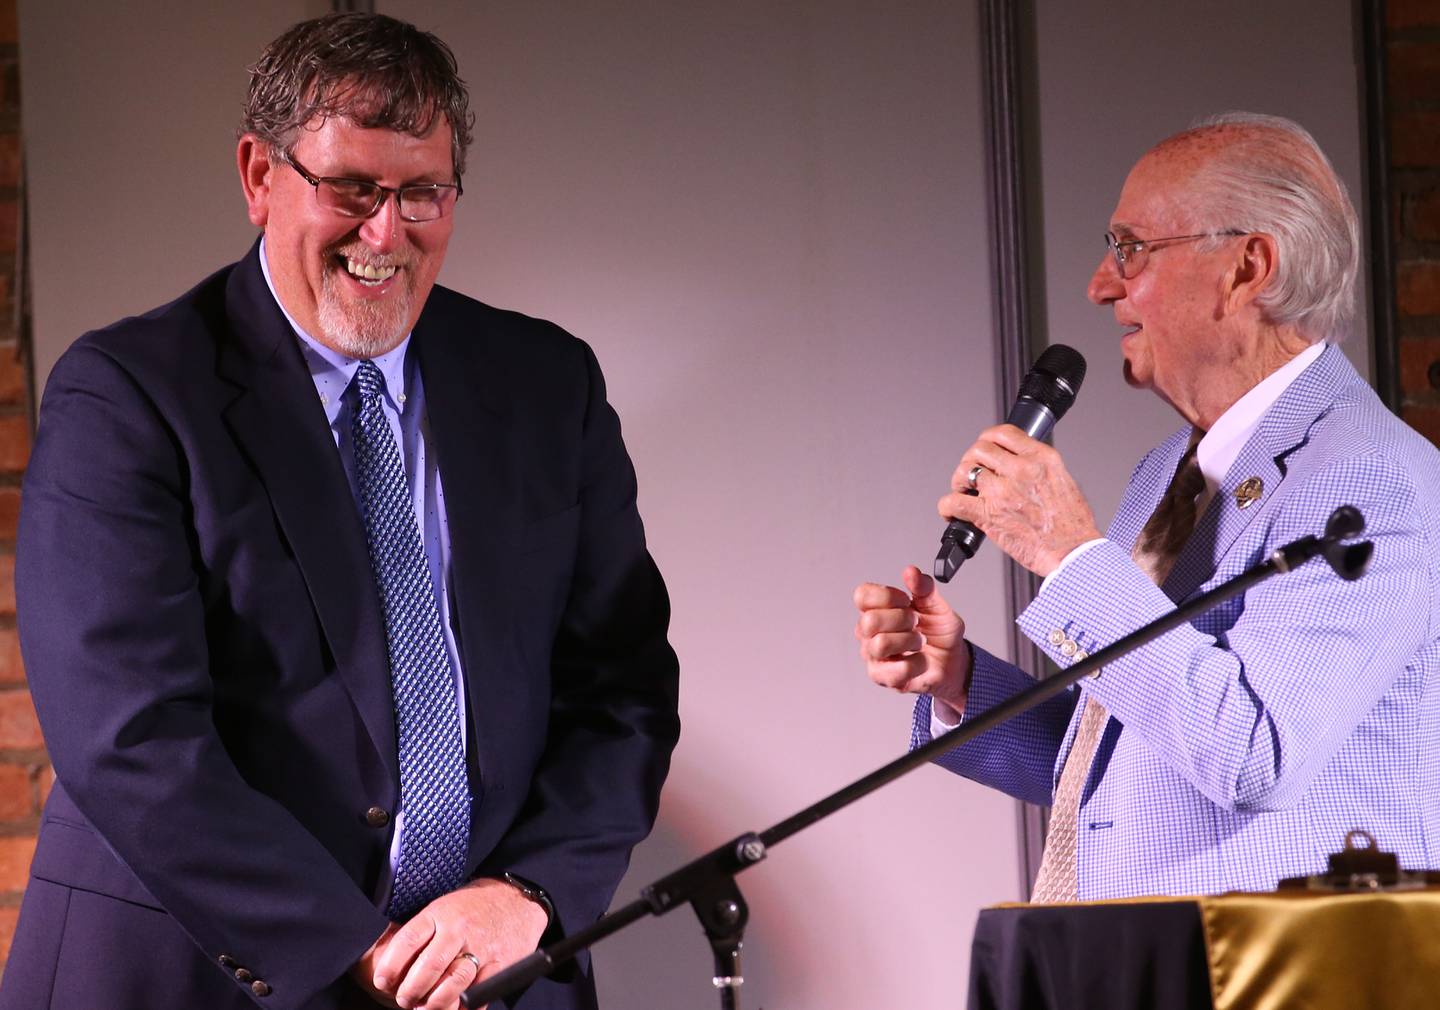 Brad Bickett smiles while being interviewed by Lanny Slevin Emcee during the Shaw Media Illinois Valley Sports Hall of Fame on Thursday, June 8, 2023 at the Auditorium Ballroom in La Salle. Bickett was the star player on the 1985-1986 Ohio basketball team who finished state runner-up.